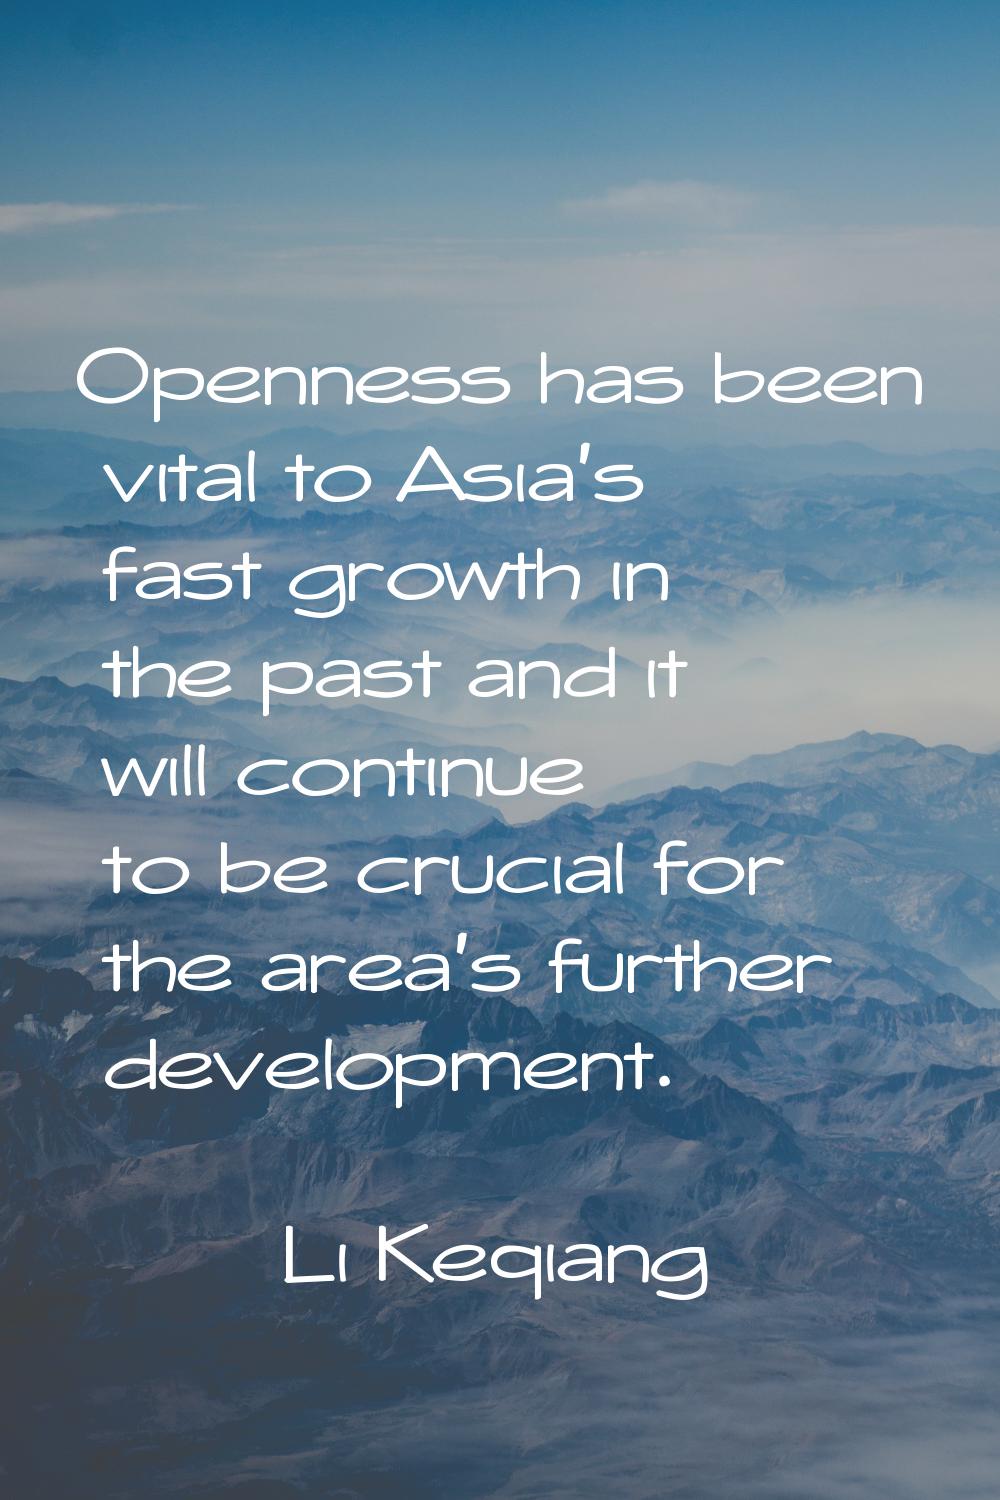 Openness has been vital to Asia's fast growth in the past and it will continue to be crucial for th